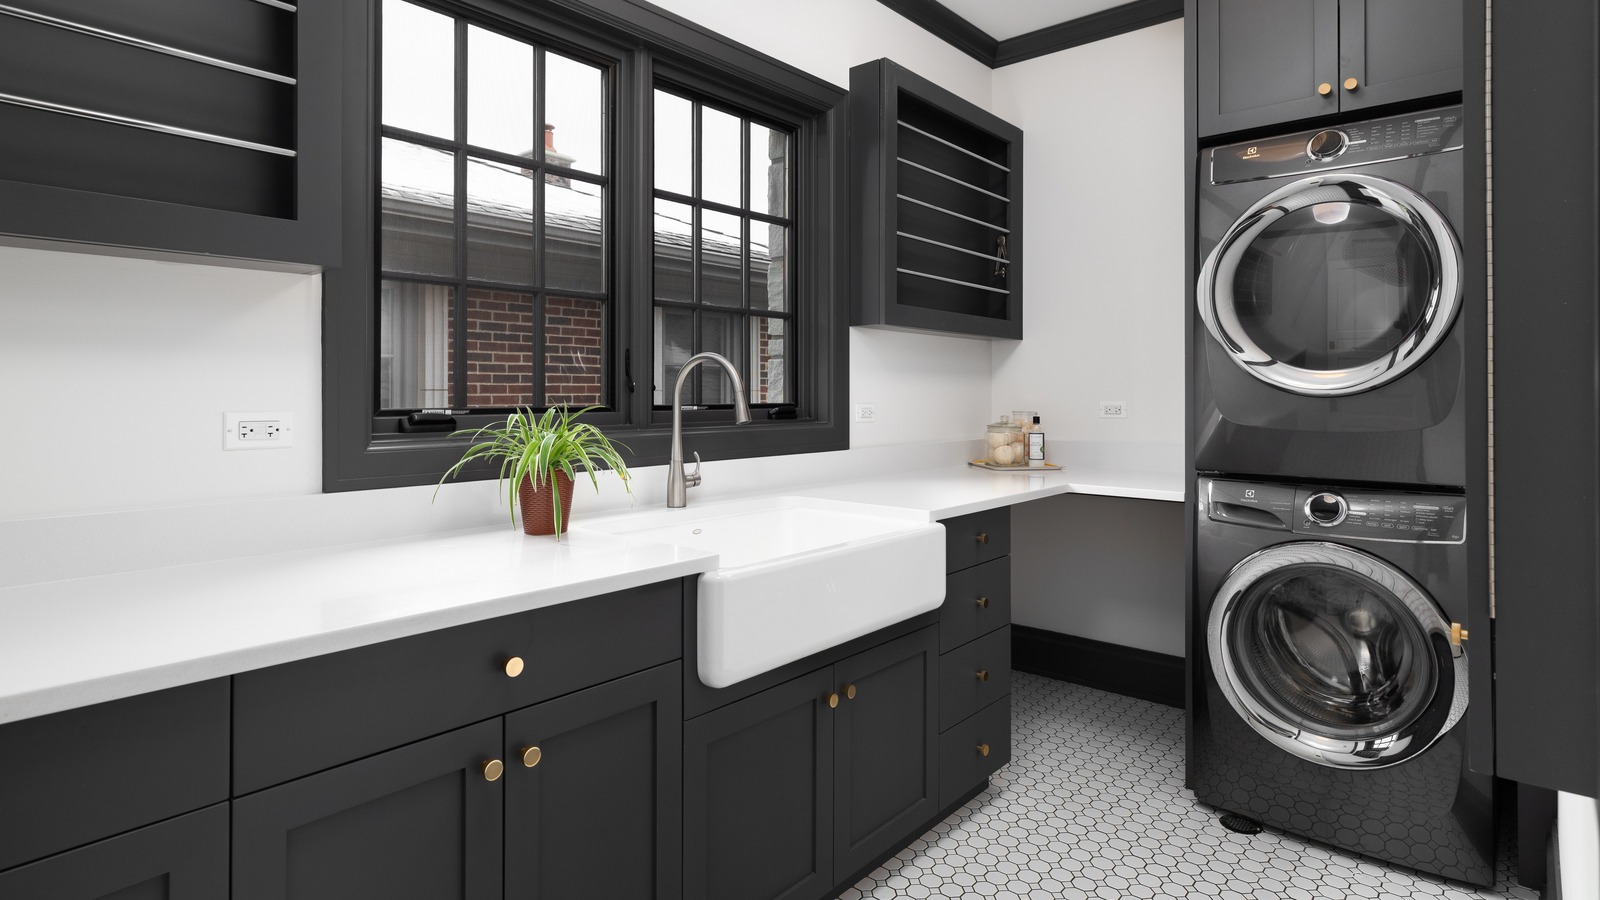 https://www.housedigest.com/img/gallery/40-laundry-rooms-that-will-make-you-want-to-stack-your-washer-and-dryer/l-intro-1664275792.jpg